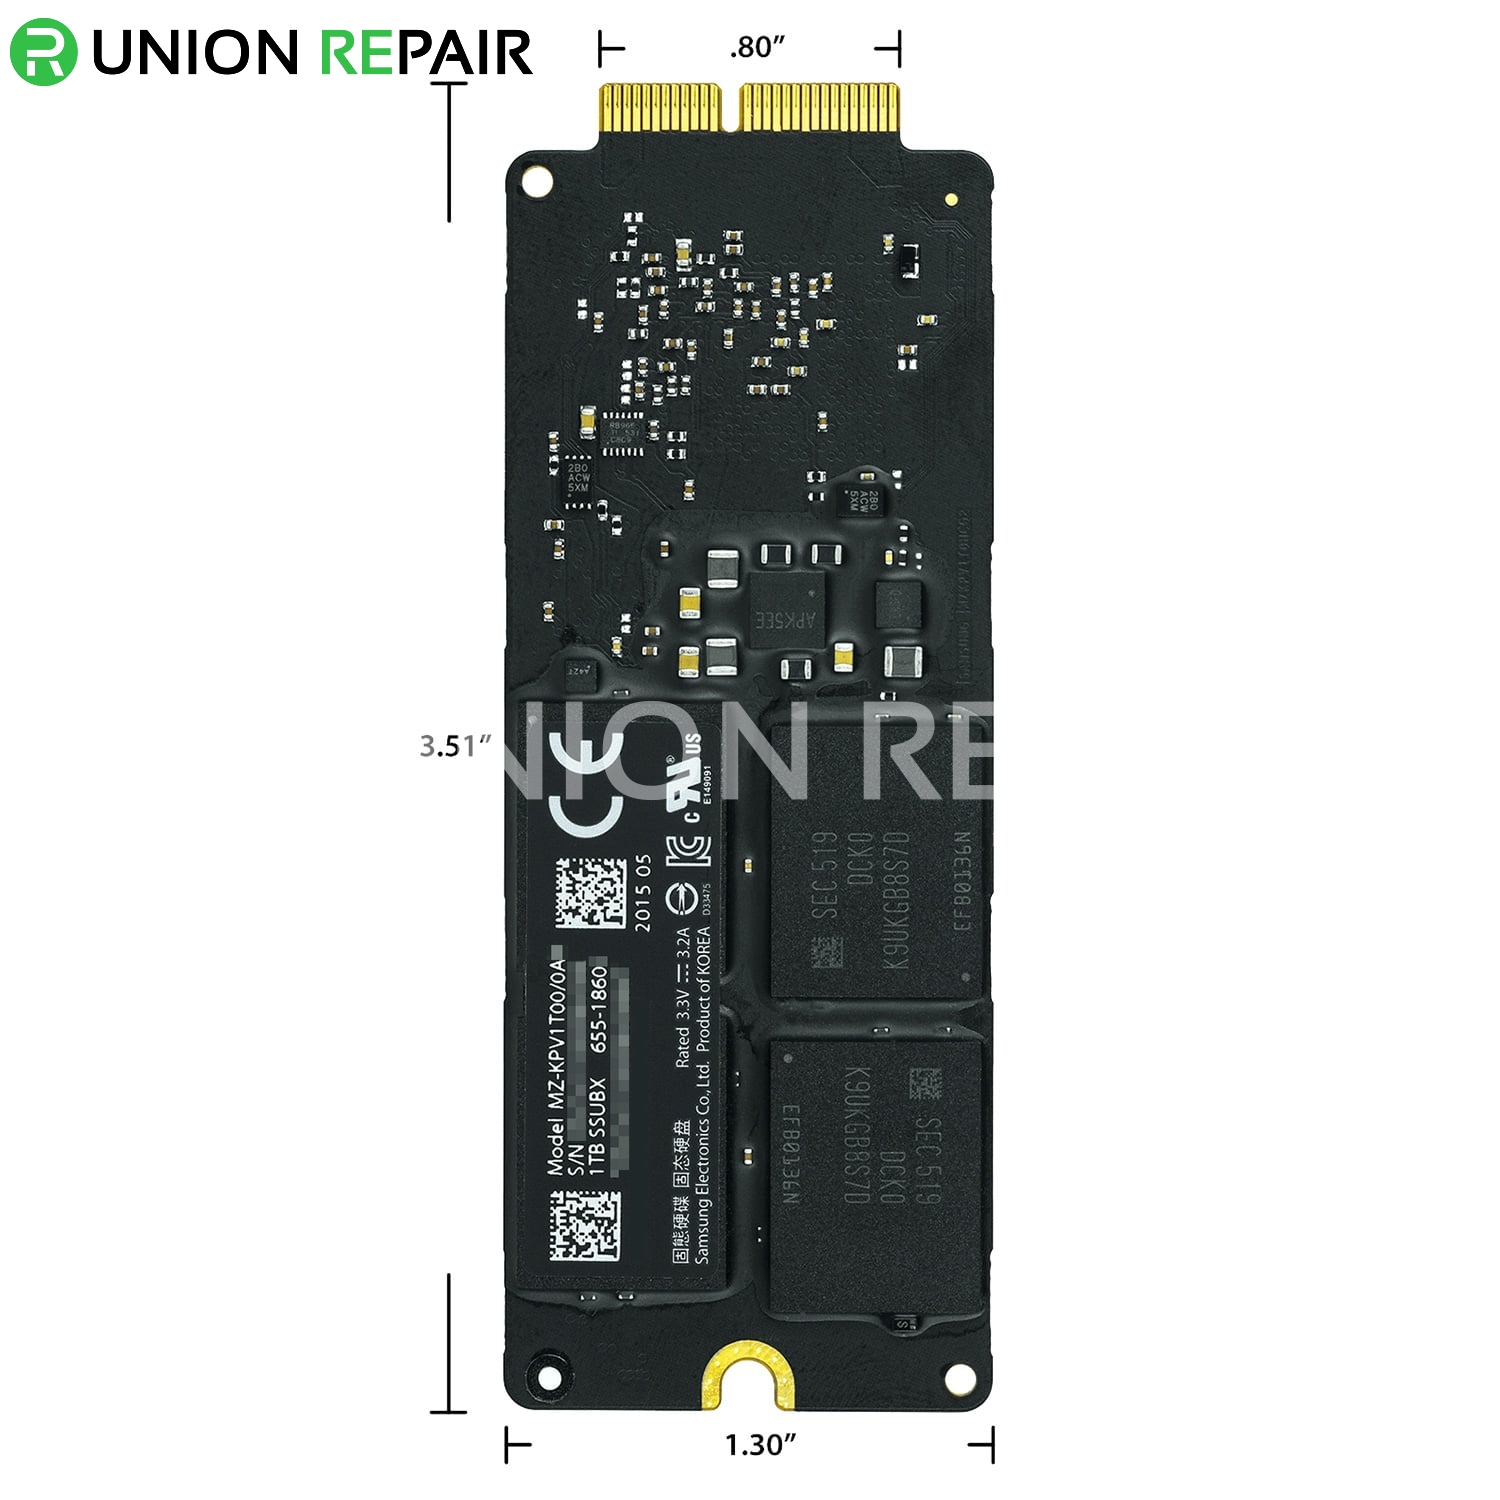 Solid State Drive for iMac 27" A1419 (Late 2015)